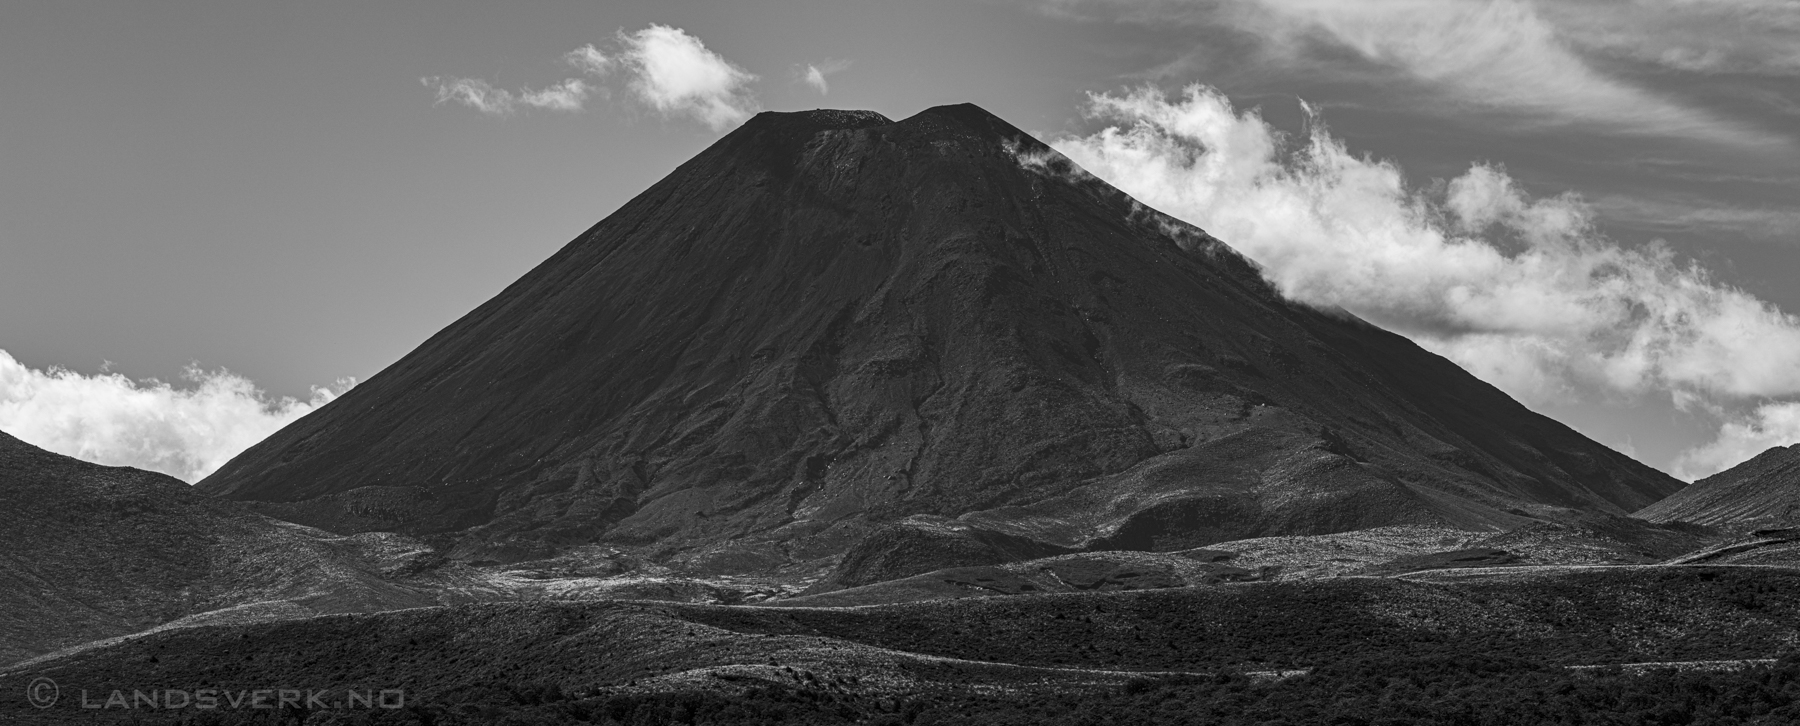 Mount Ngauruhoe aka Mount Doom, Tongariro National Park, New Zealand. The only day with good weather of course.

(Canon EOS 5D Mark IV / Canon EF 100-400mm f/4.5-5.6 L IS II USM)